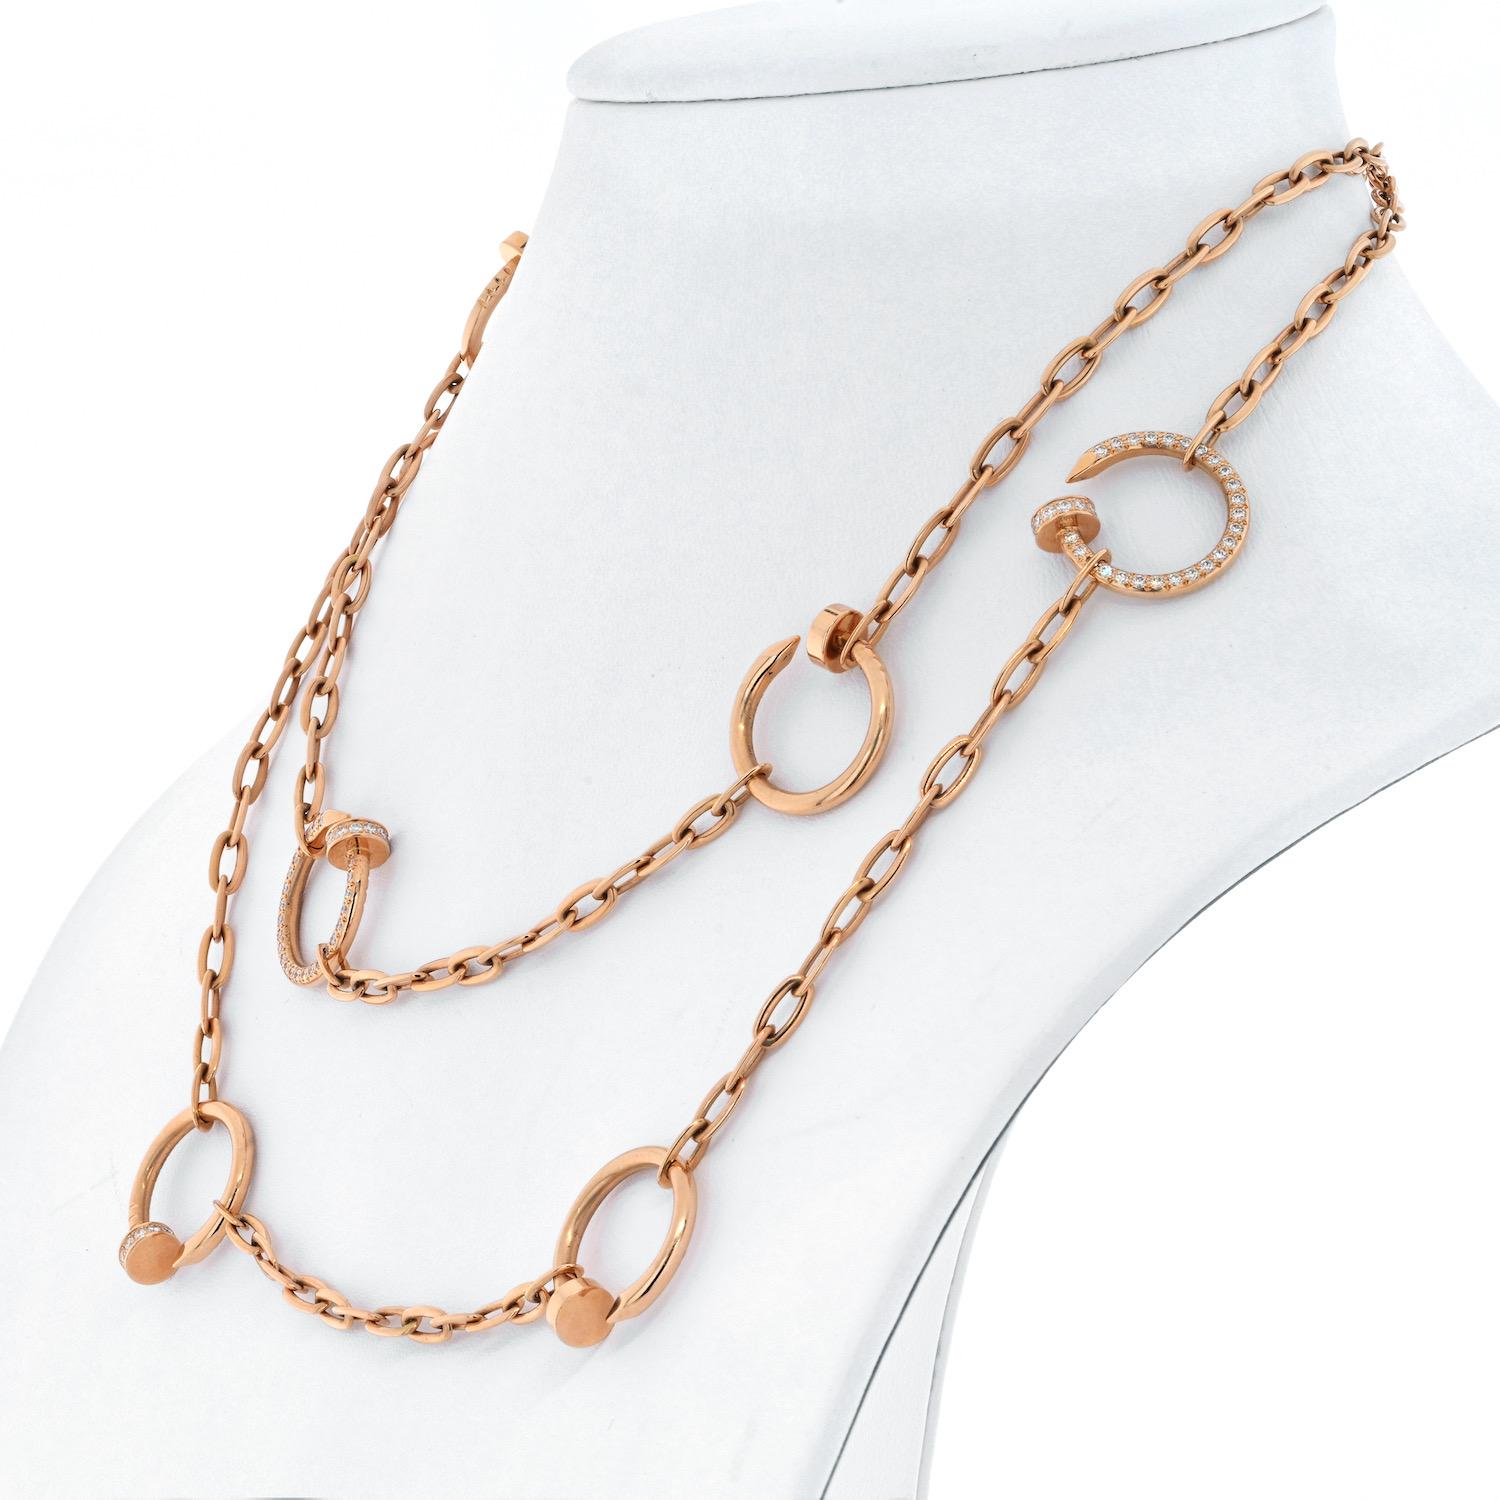 18k Rose Gold And Diamond Juste un Clou Long Necklace by Cartier.
With 111 Round brilliant cut diamonds VVS1 clarity E color total weight approx. 1.19ct
Length: 35 inches.
Width: 4mm
Nails: approx. 20mm x 19mm
Weight: 44.4 grams
Stamped Hallmarks: